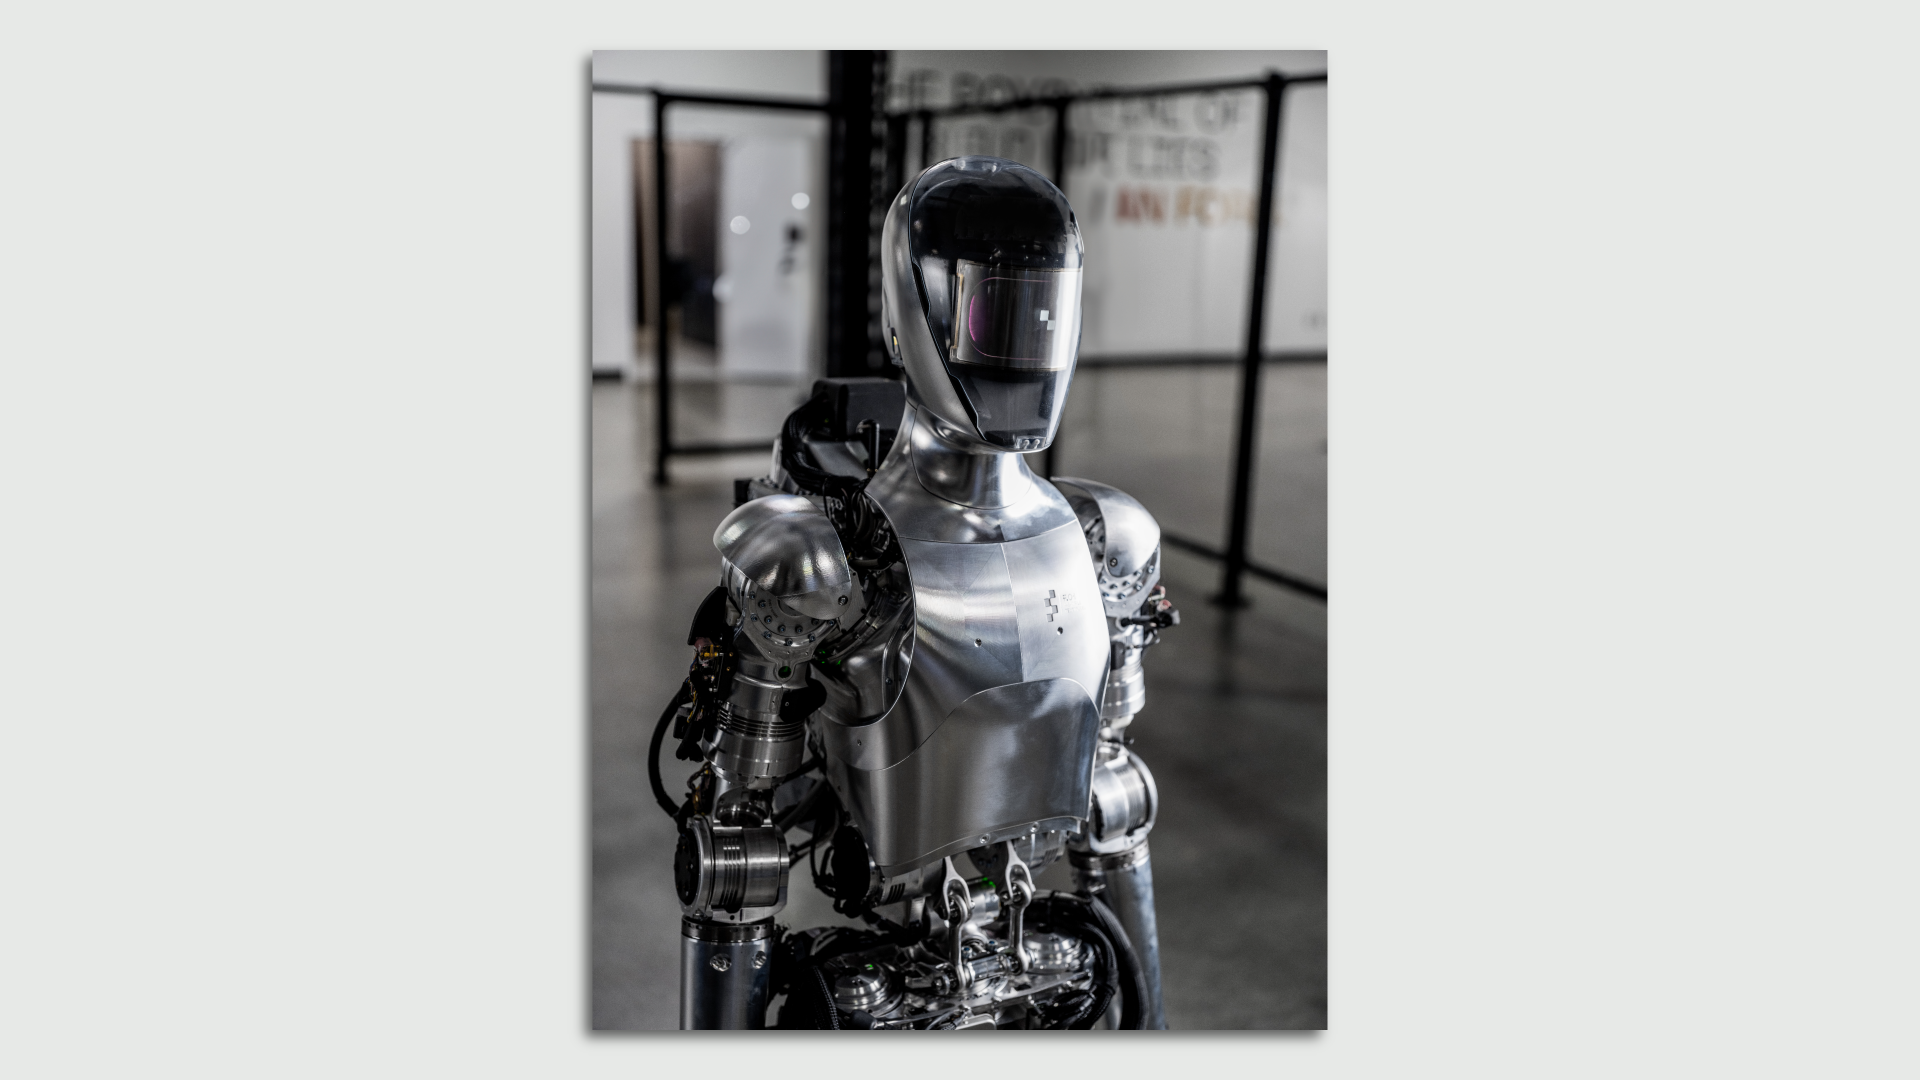 A standing image of Figure, a humanoid robot.